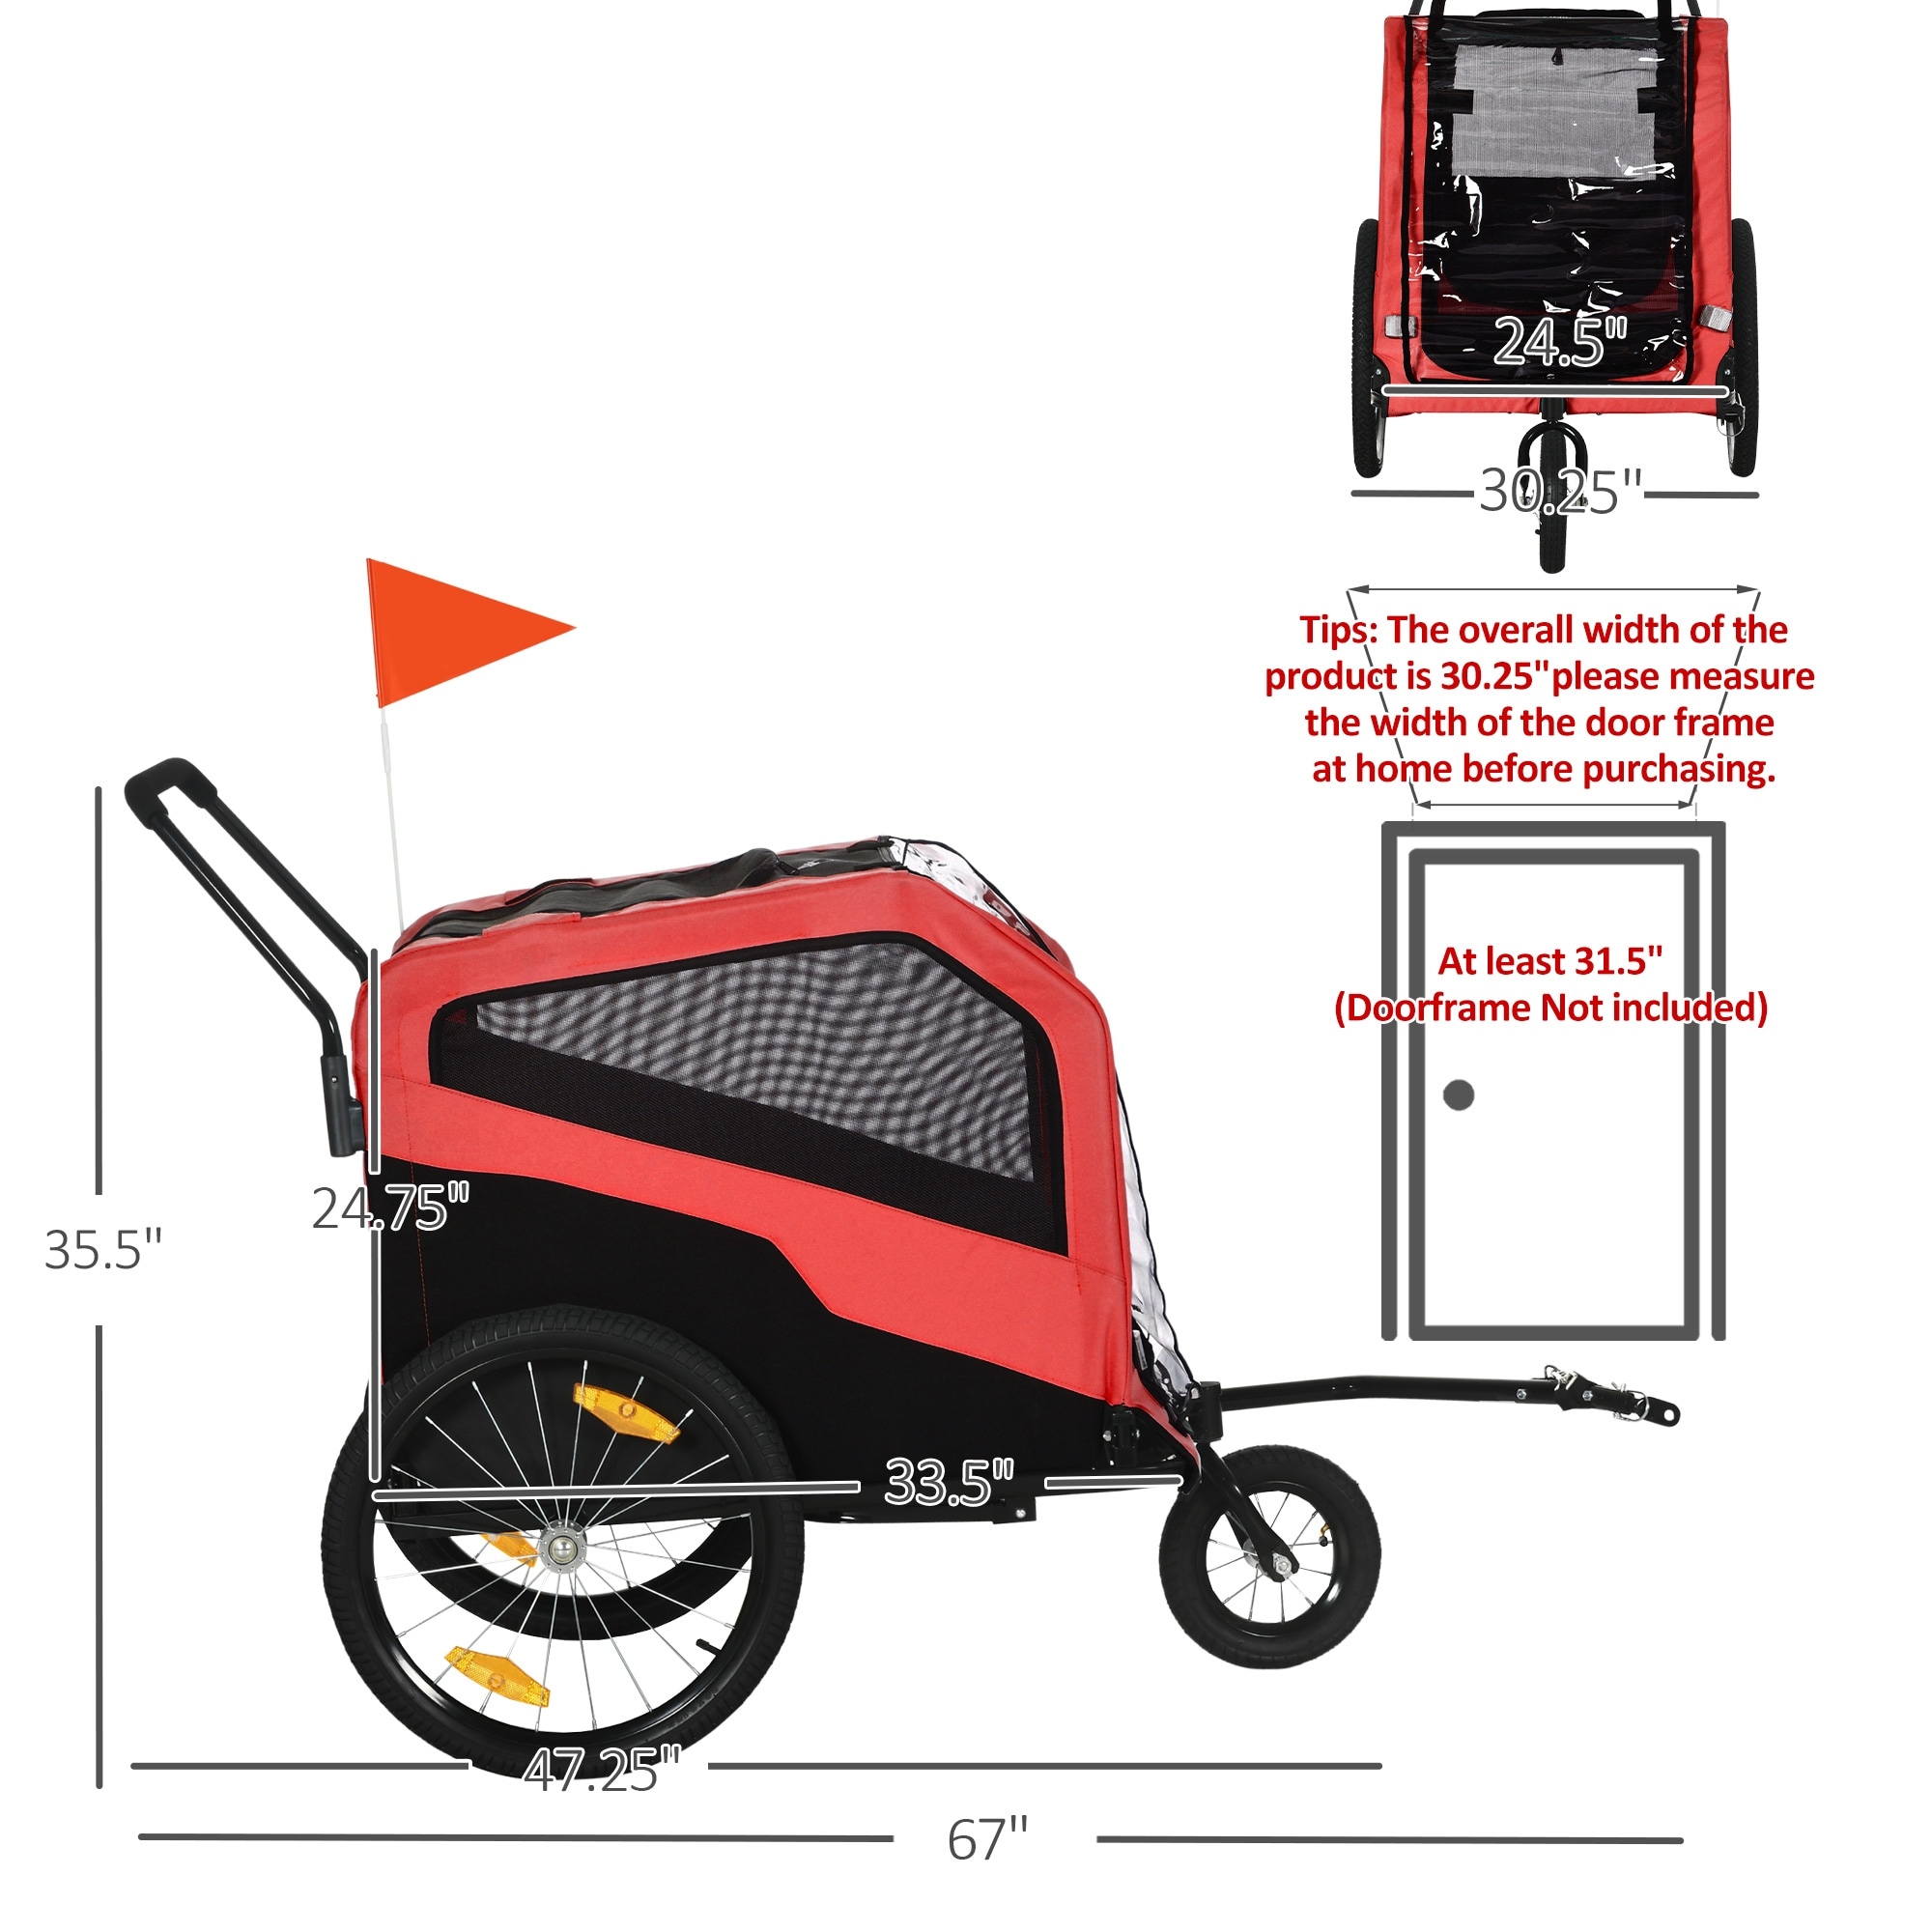 Aosom 2-in-1 Dog Bike Trailer Pet Stroller Carrier for Large Dogs with Hitch, Quick-release Wheels, Foot Support - Red